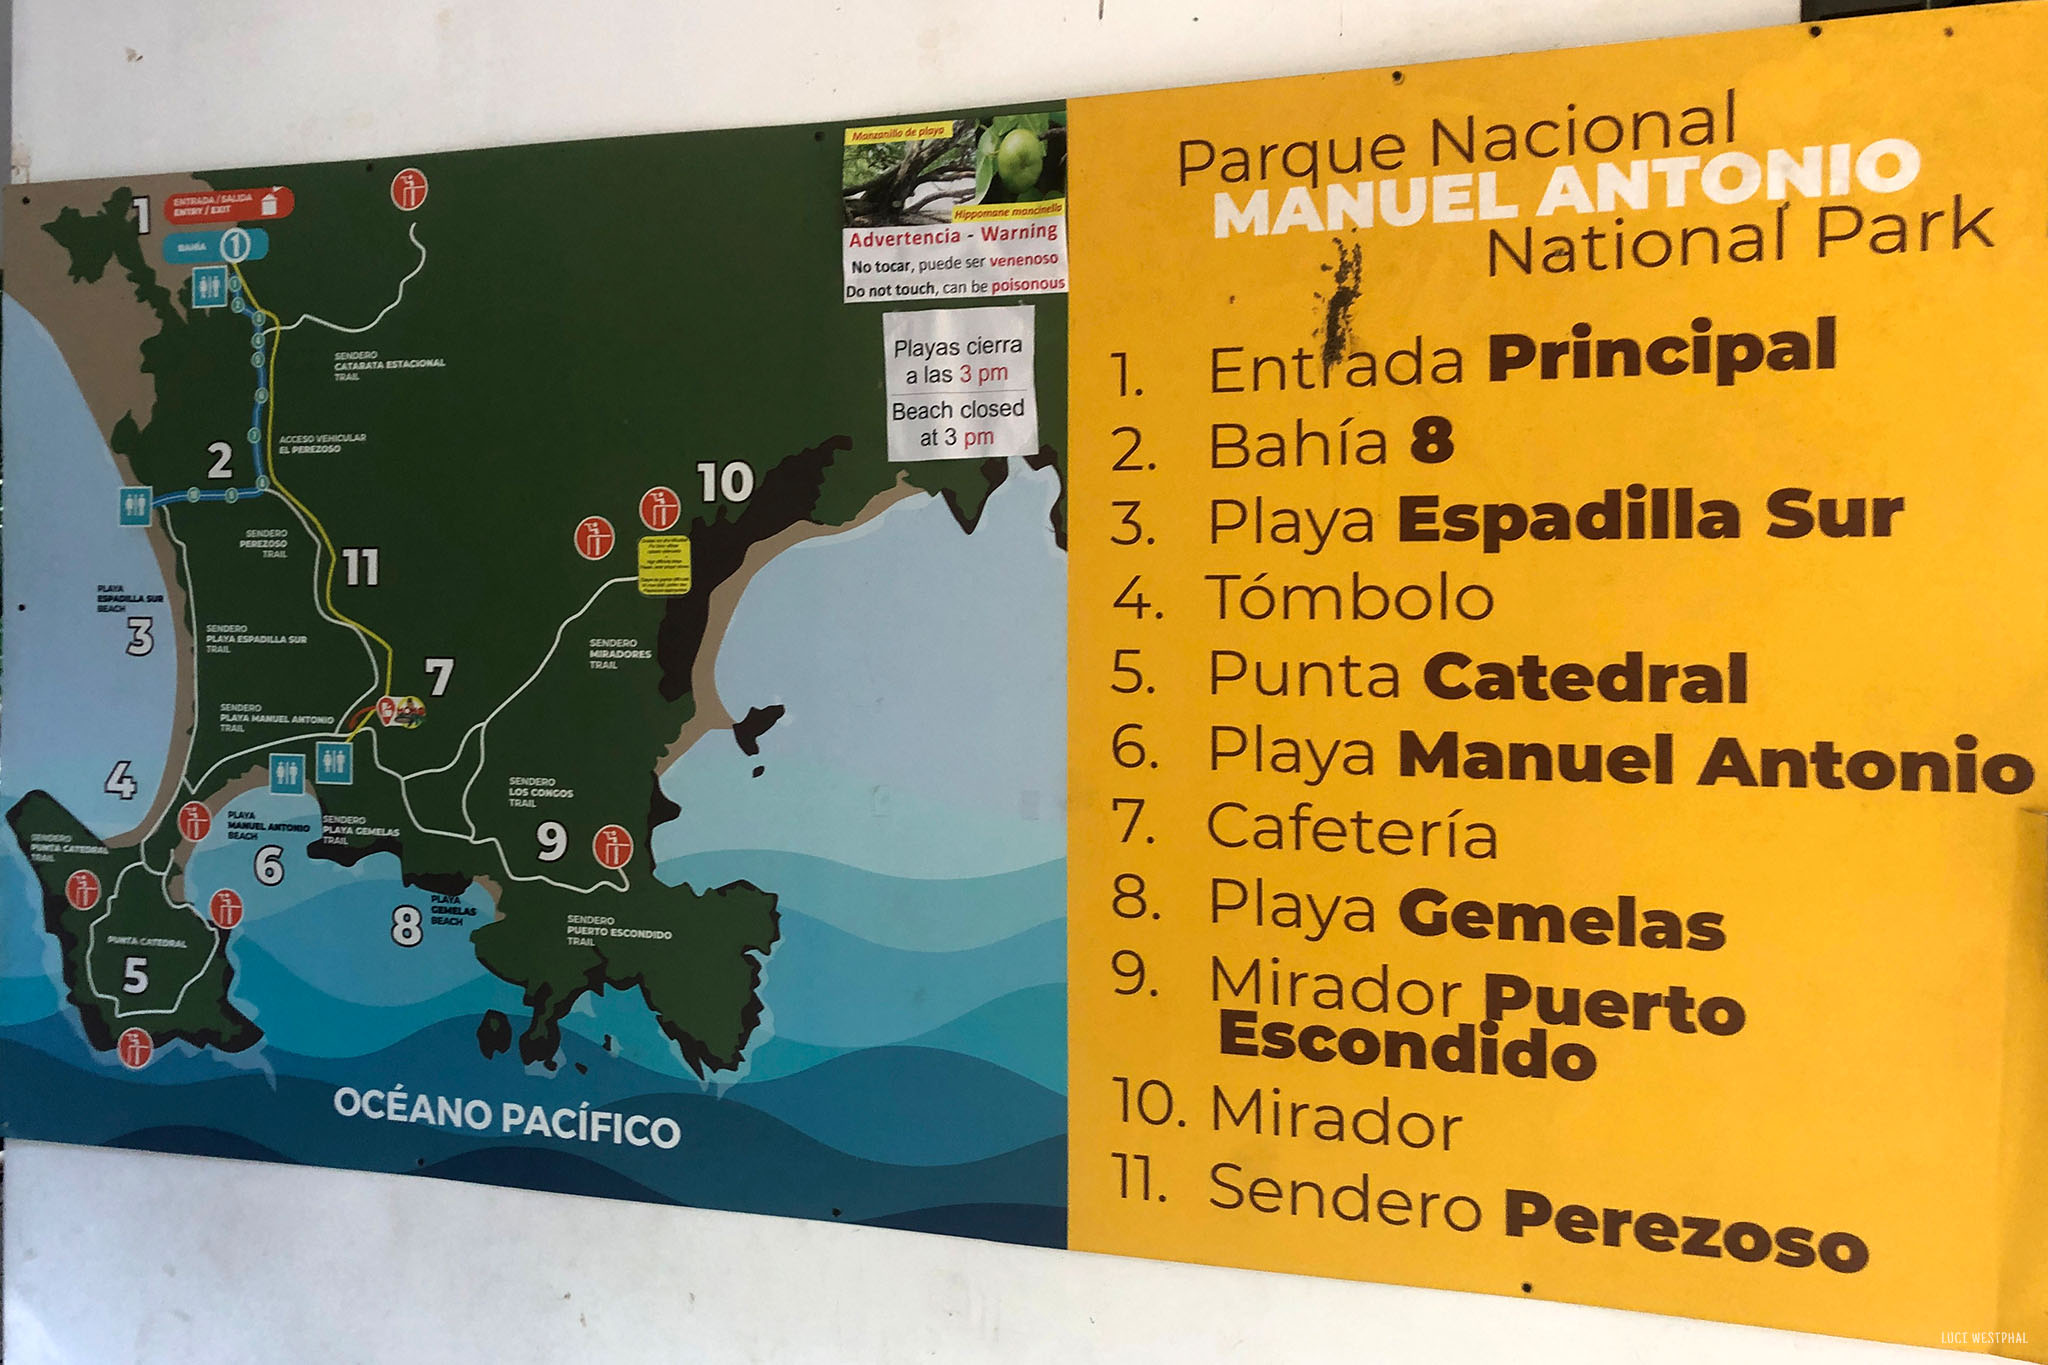 Map of trails, beaches, sights in Manuel Antonio National Park, Costa Rica 